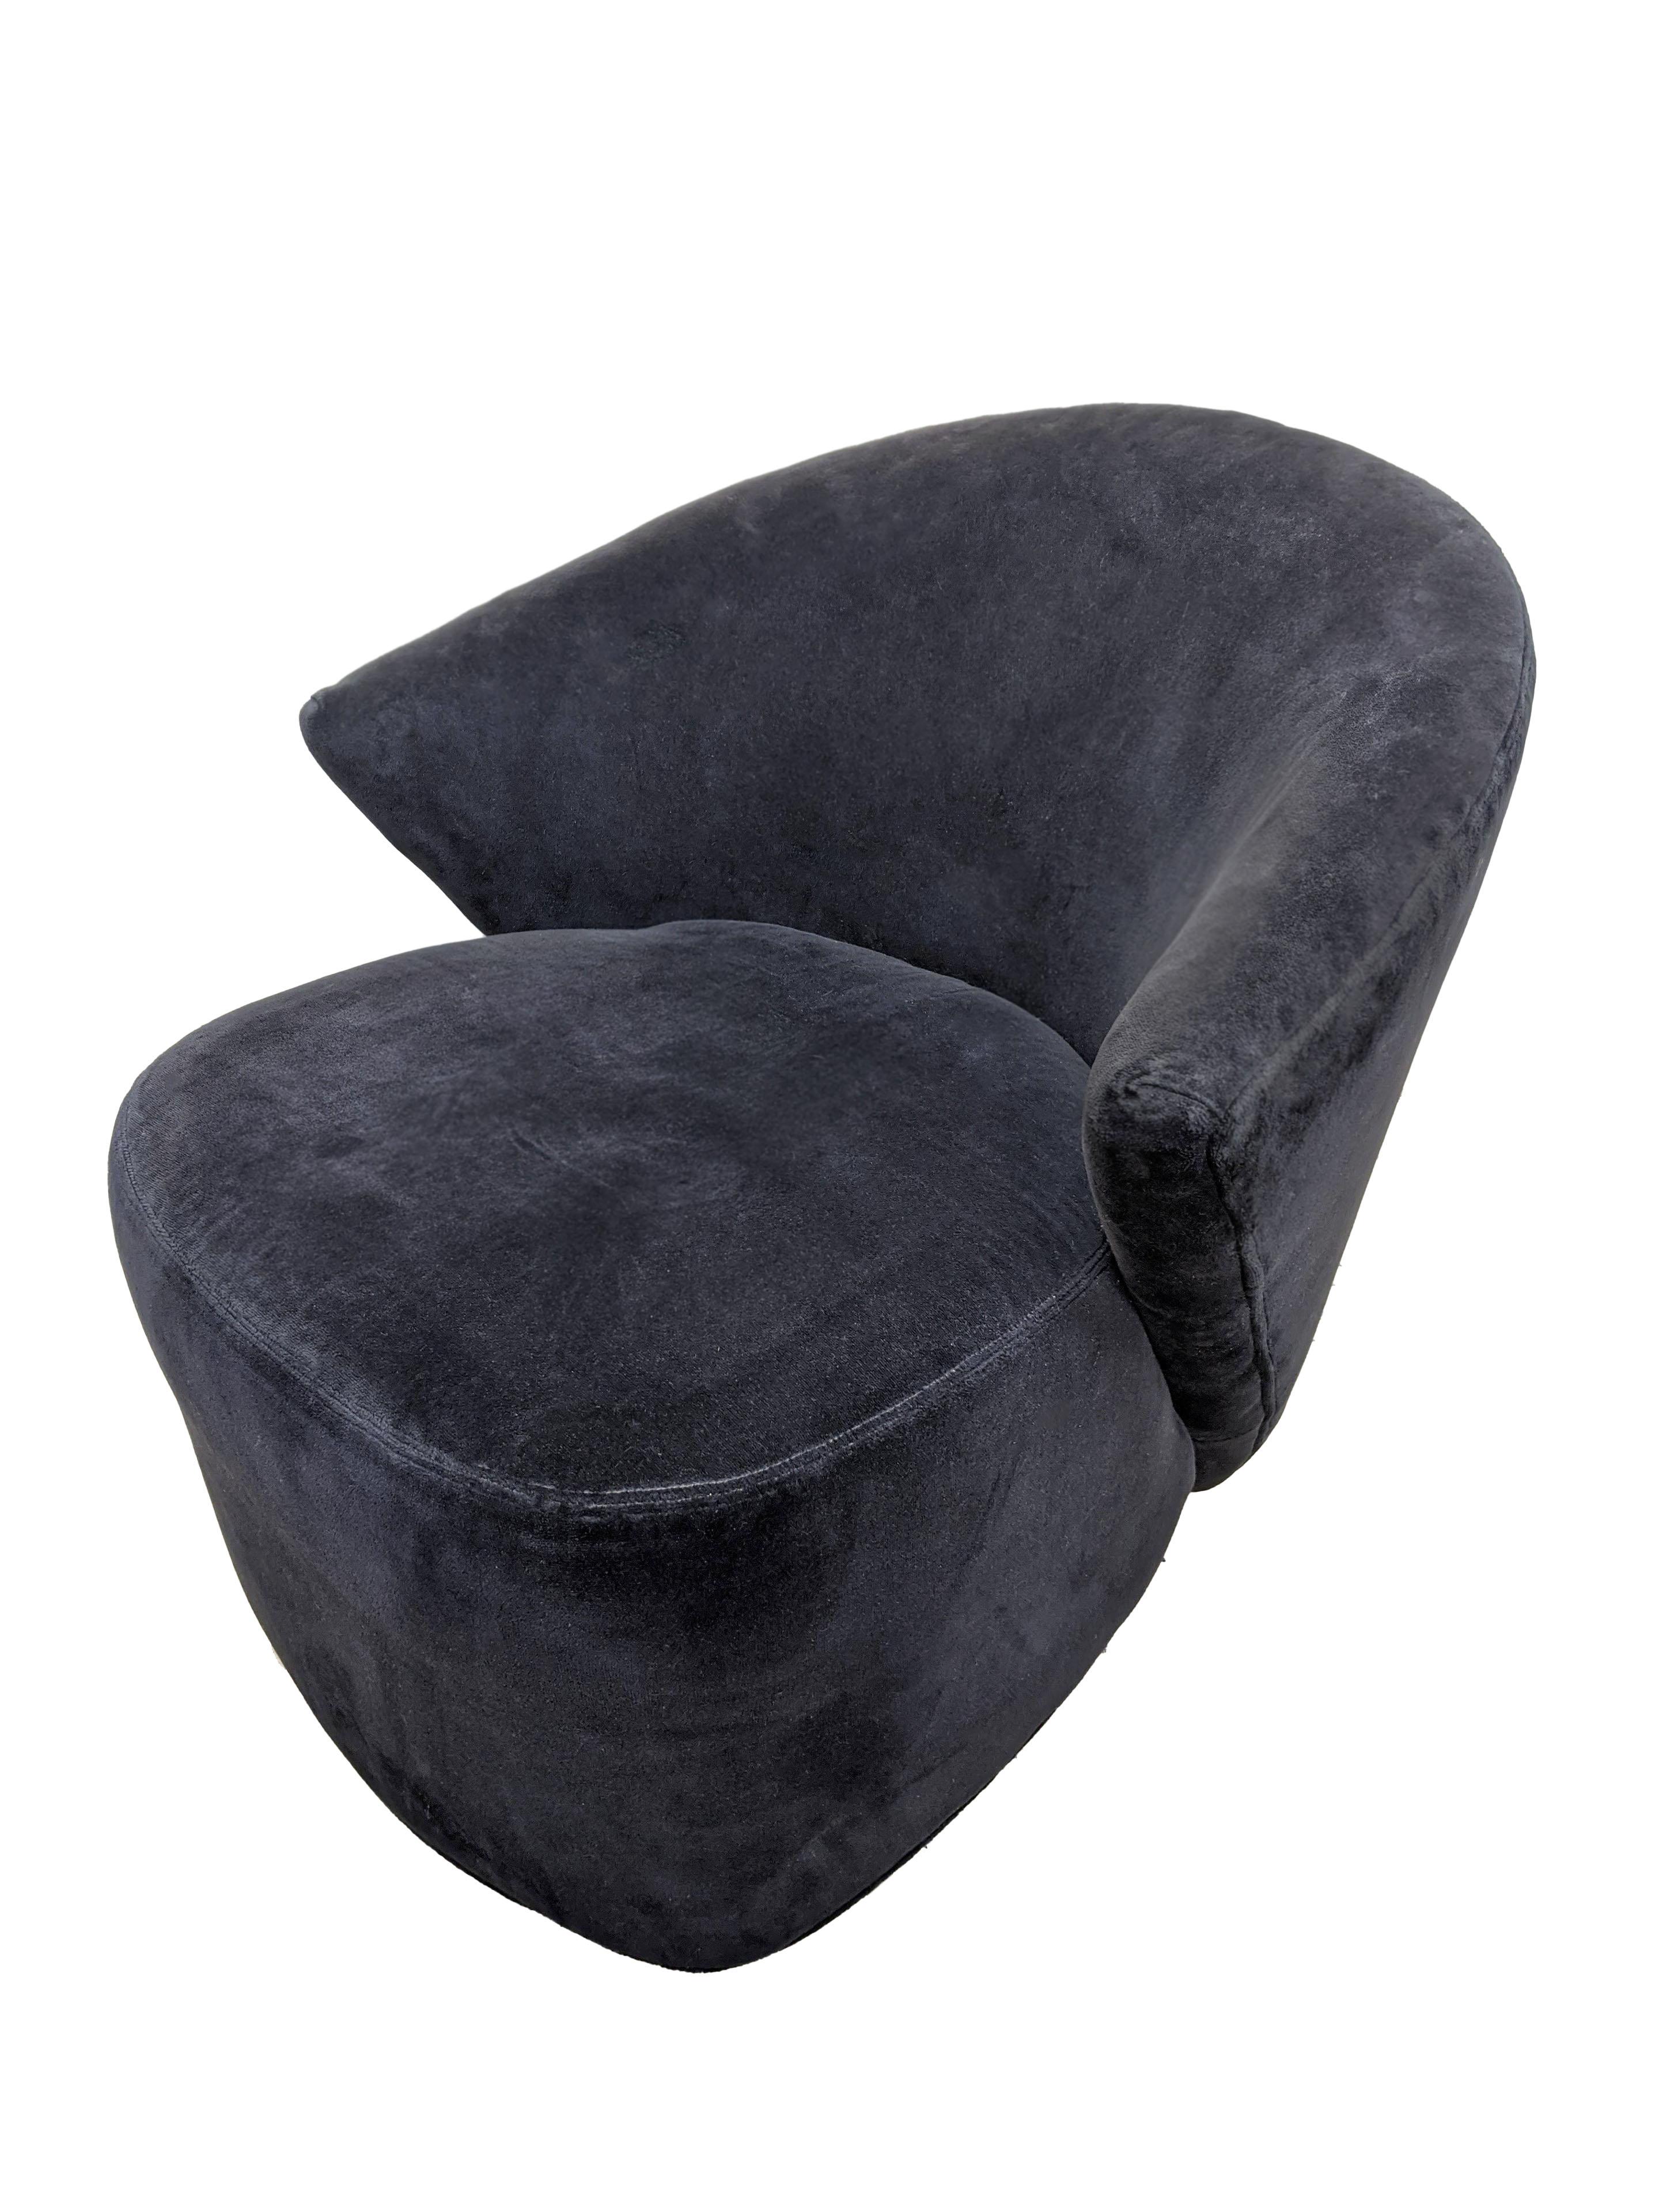 An absolutely stunning pair of swivel lounge chairs designed by Michael Wolk for Directional Furniture. These chairs are upholstered in the original dark charcoal velvet and are not only beautiful , but also incredibly comfortable. These Wolk lounge